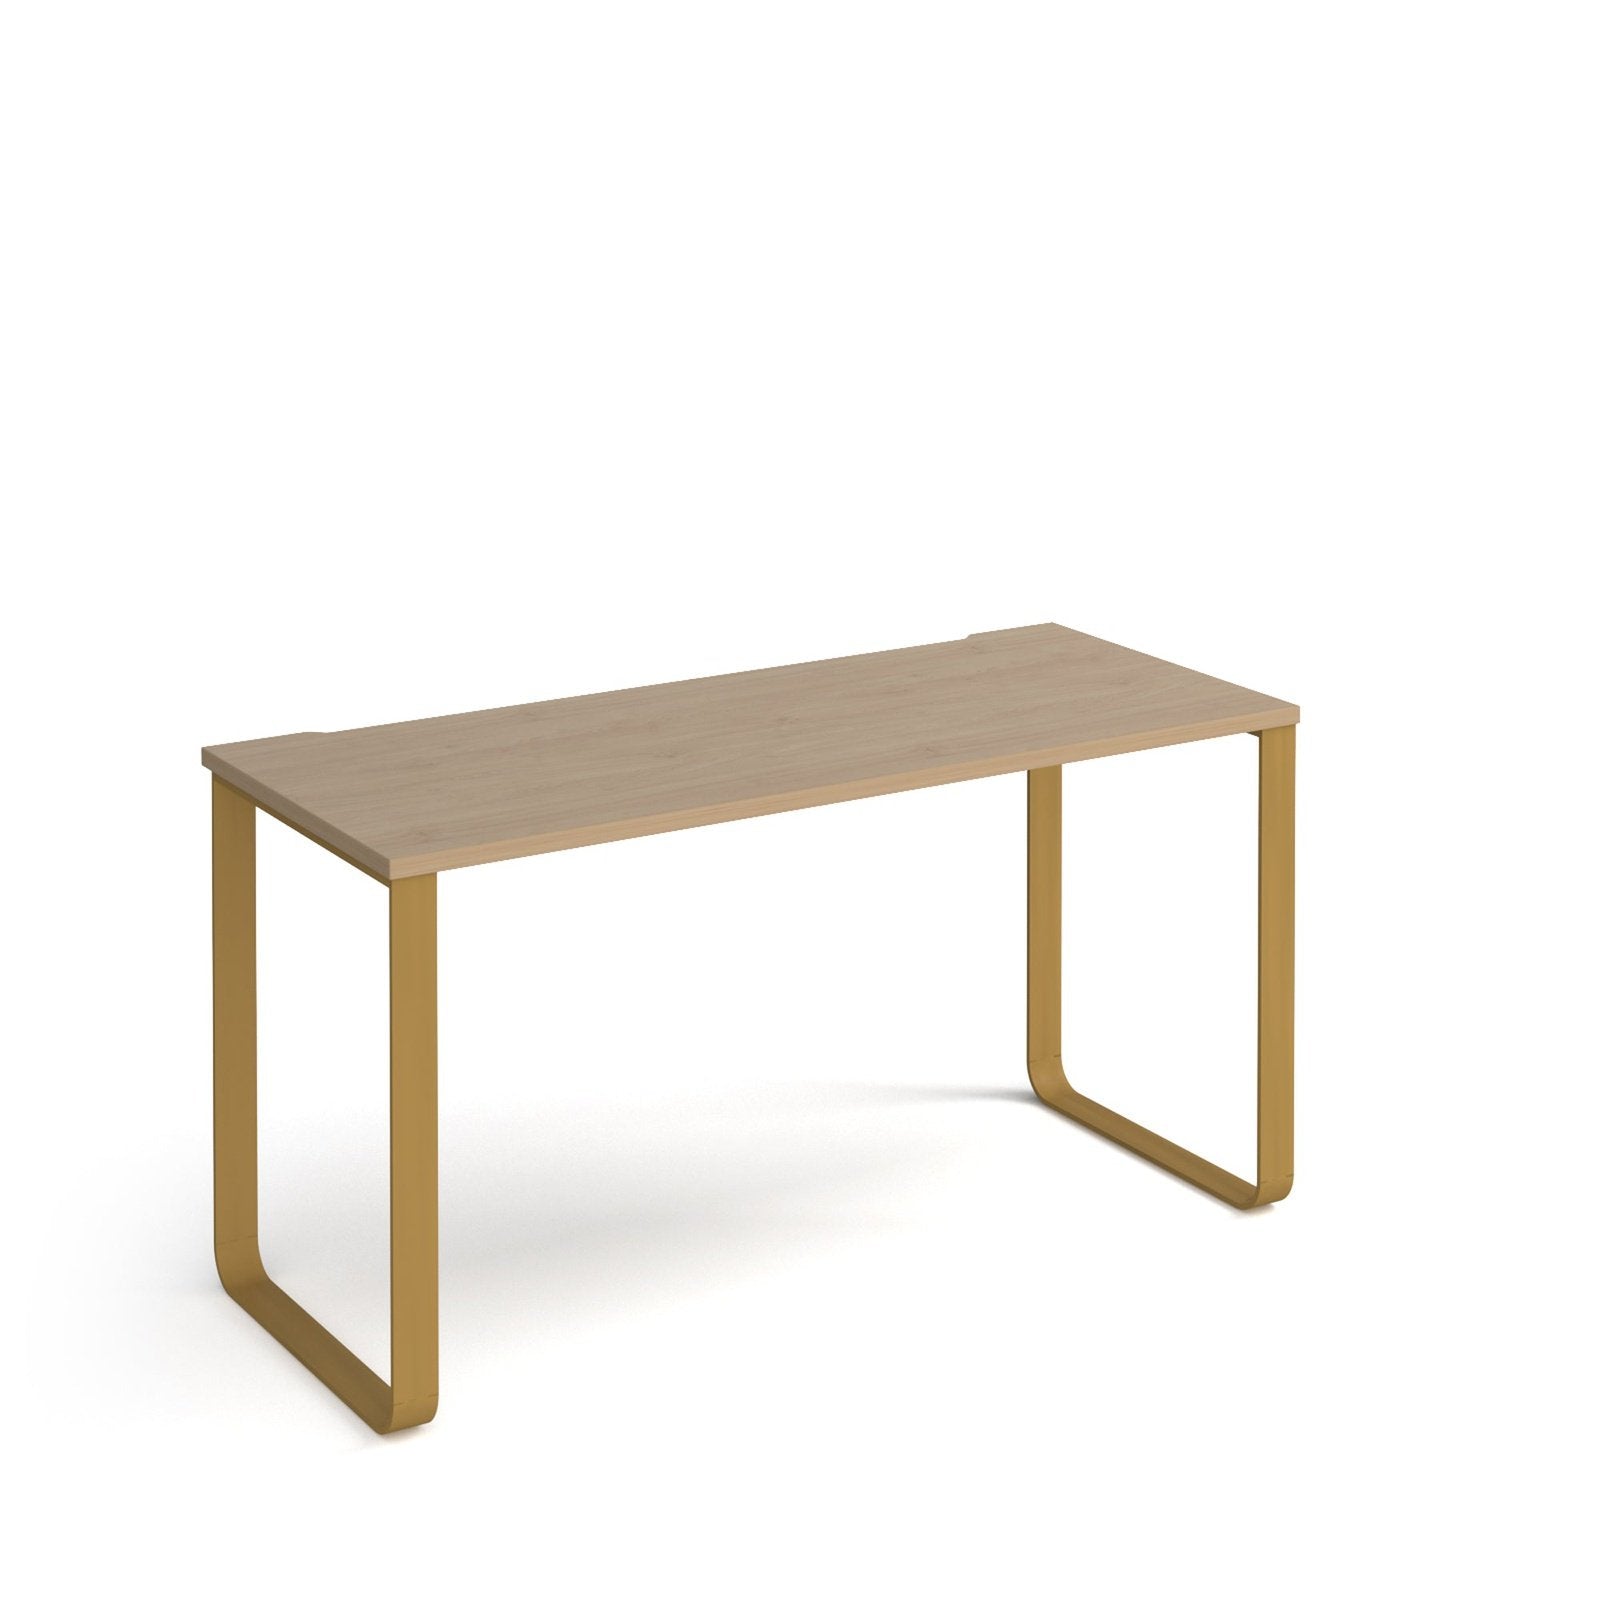 Cairo straight desk with sleigh frame legs - Office Products Online